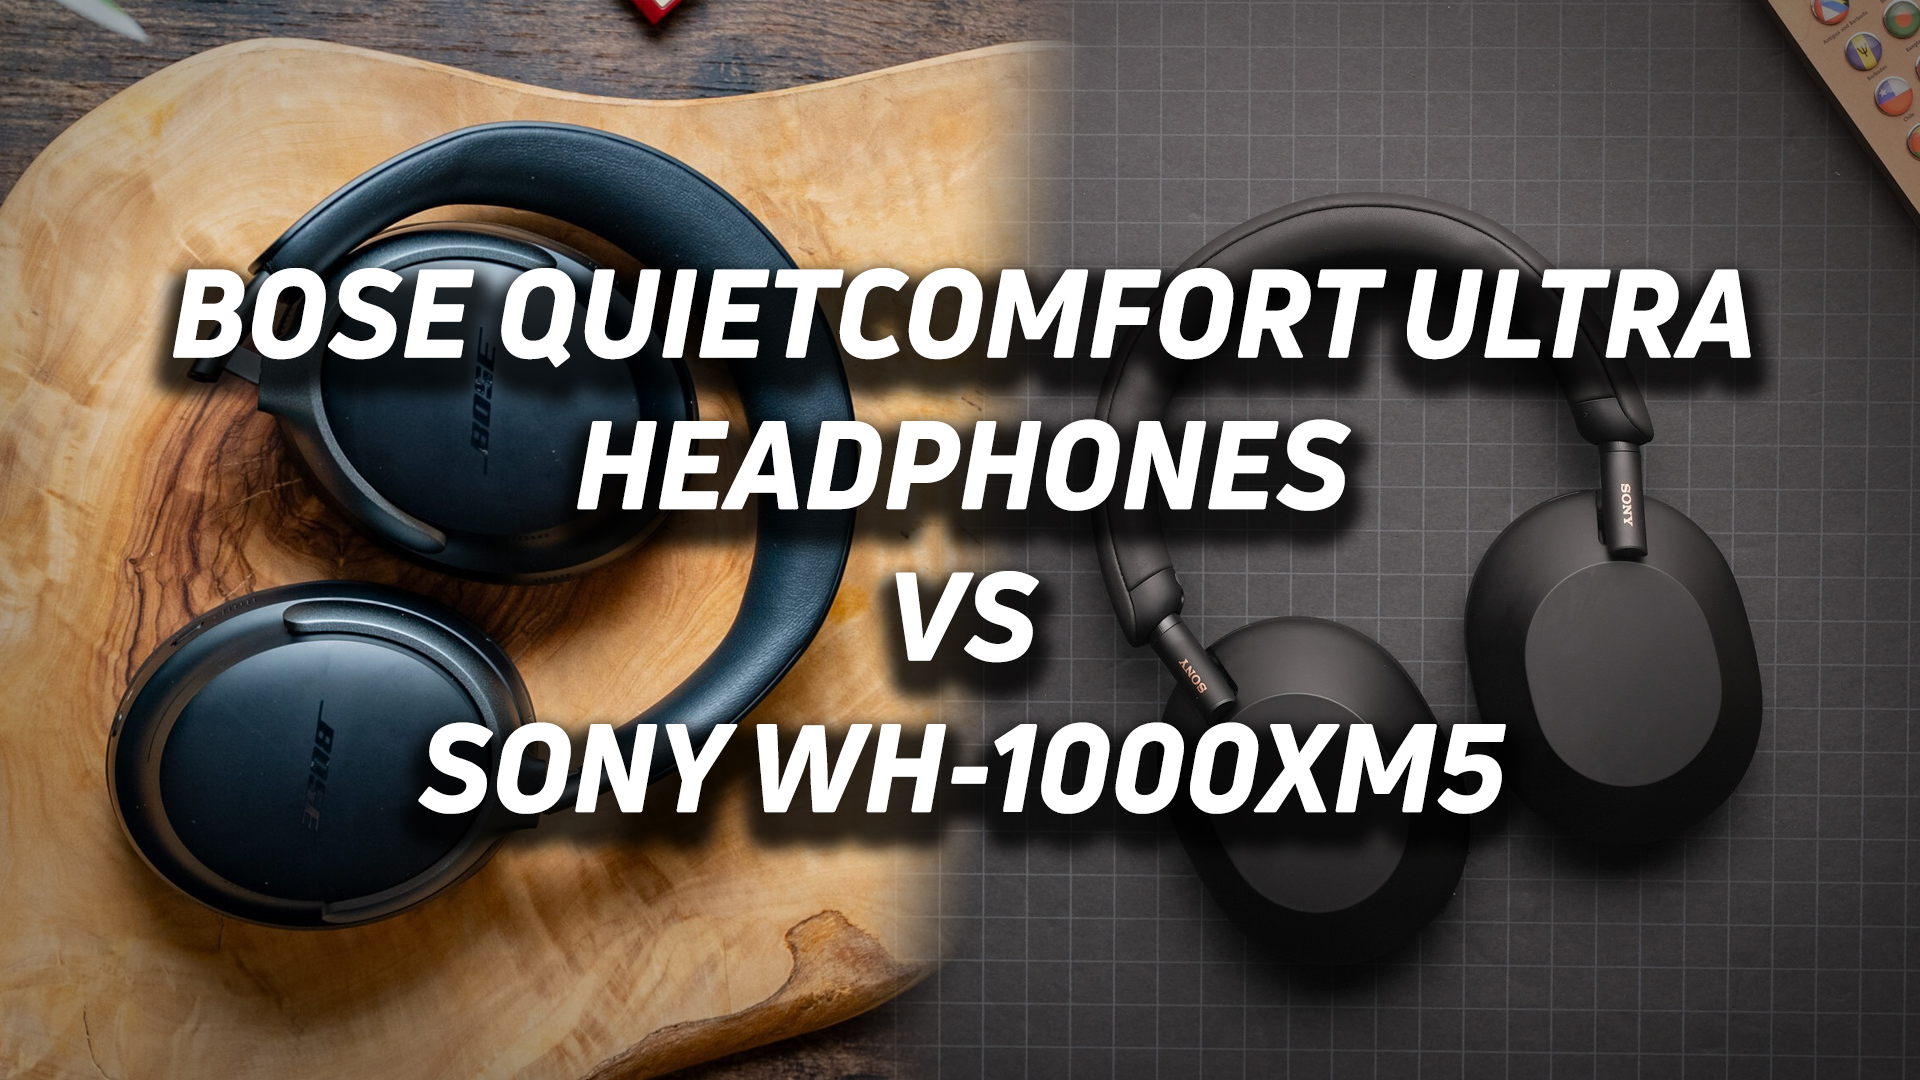 Sony WH1000XM5 Wireless Noise-Canceling Over-the-Ear Headphones Blue  WH1000XM5/L - Best Buy